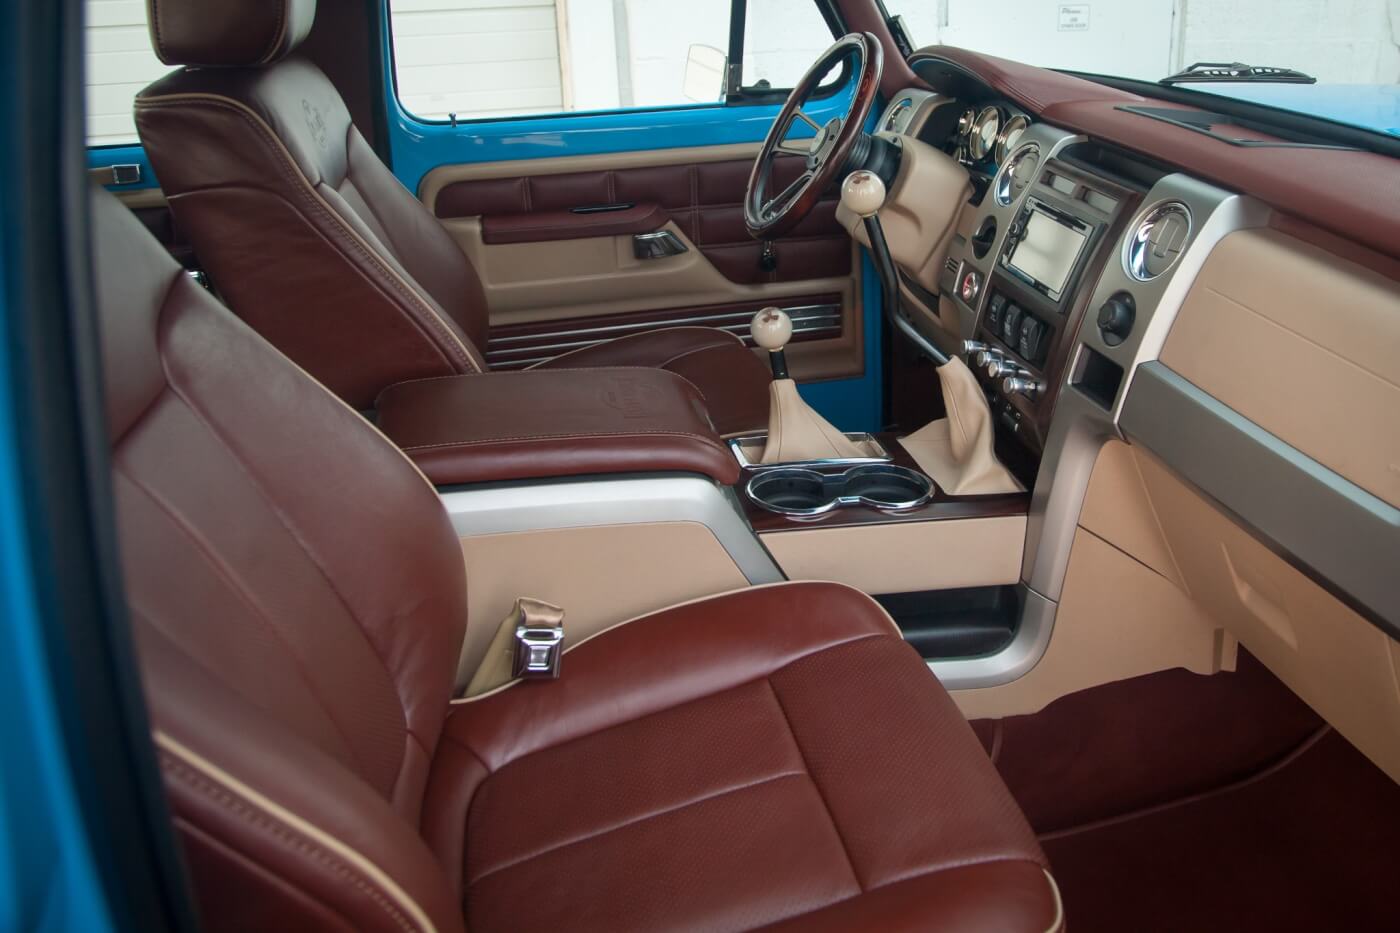 Other than the painted window sills and custom steering wheel, you’d never know you were driving a 1977 truck but rather a new King Ranch Super Duty.